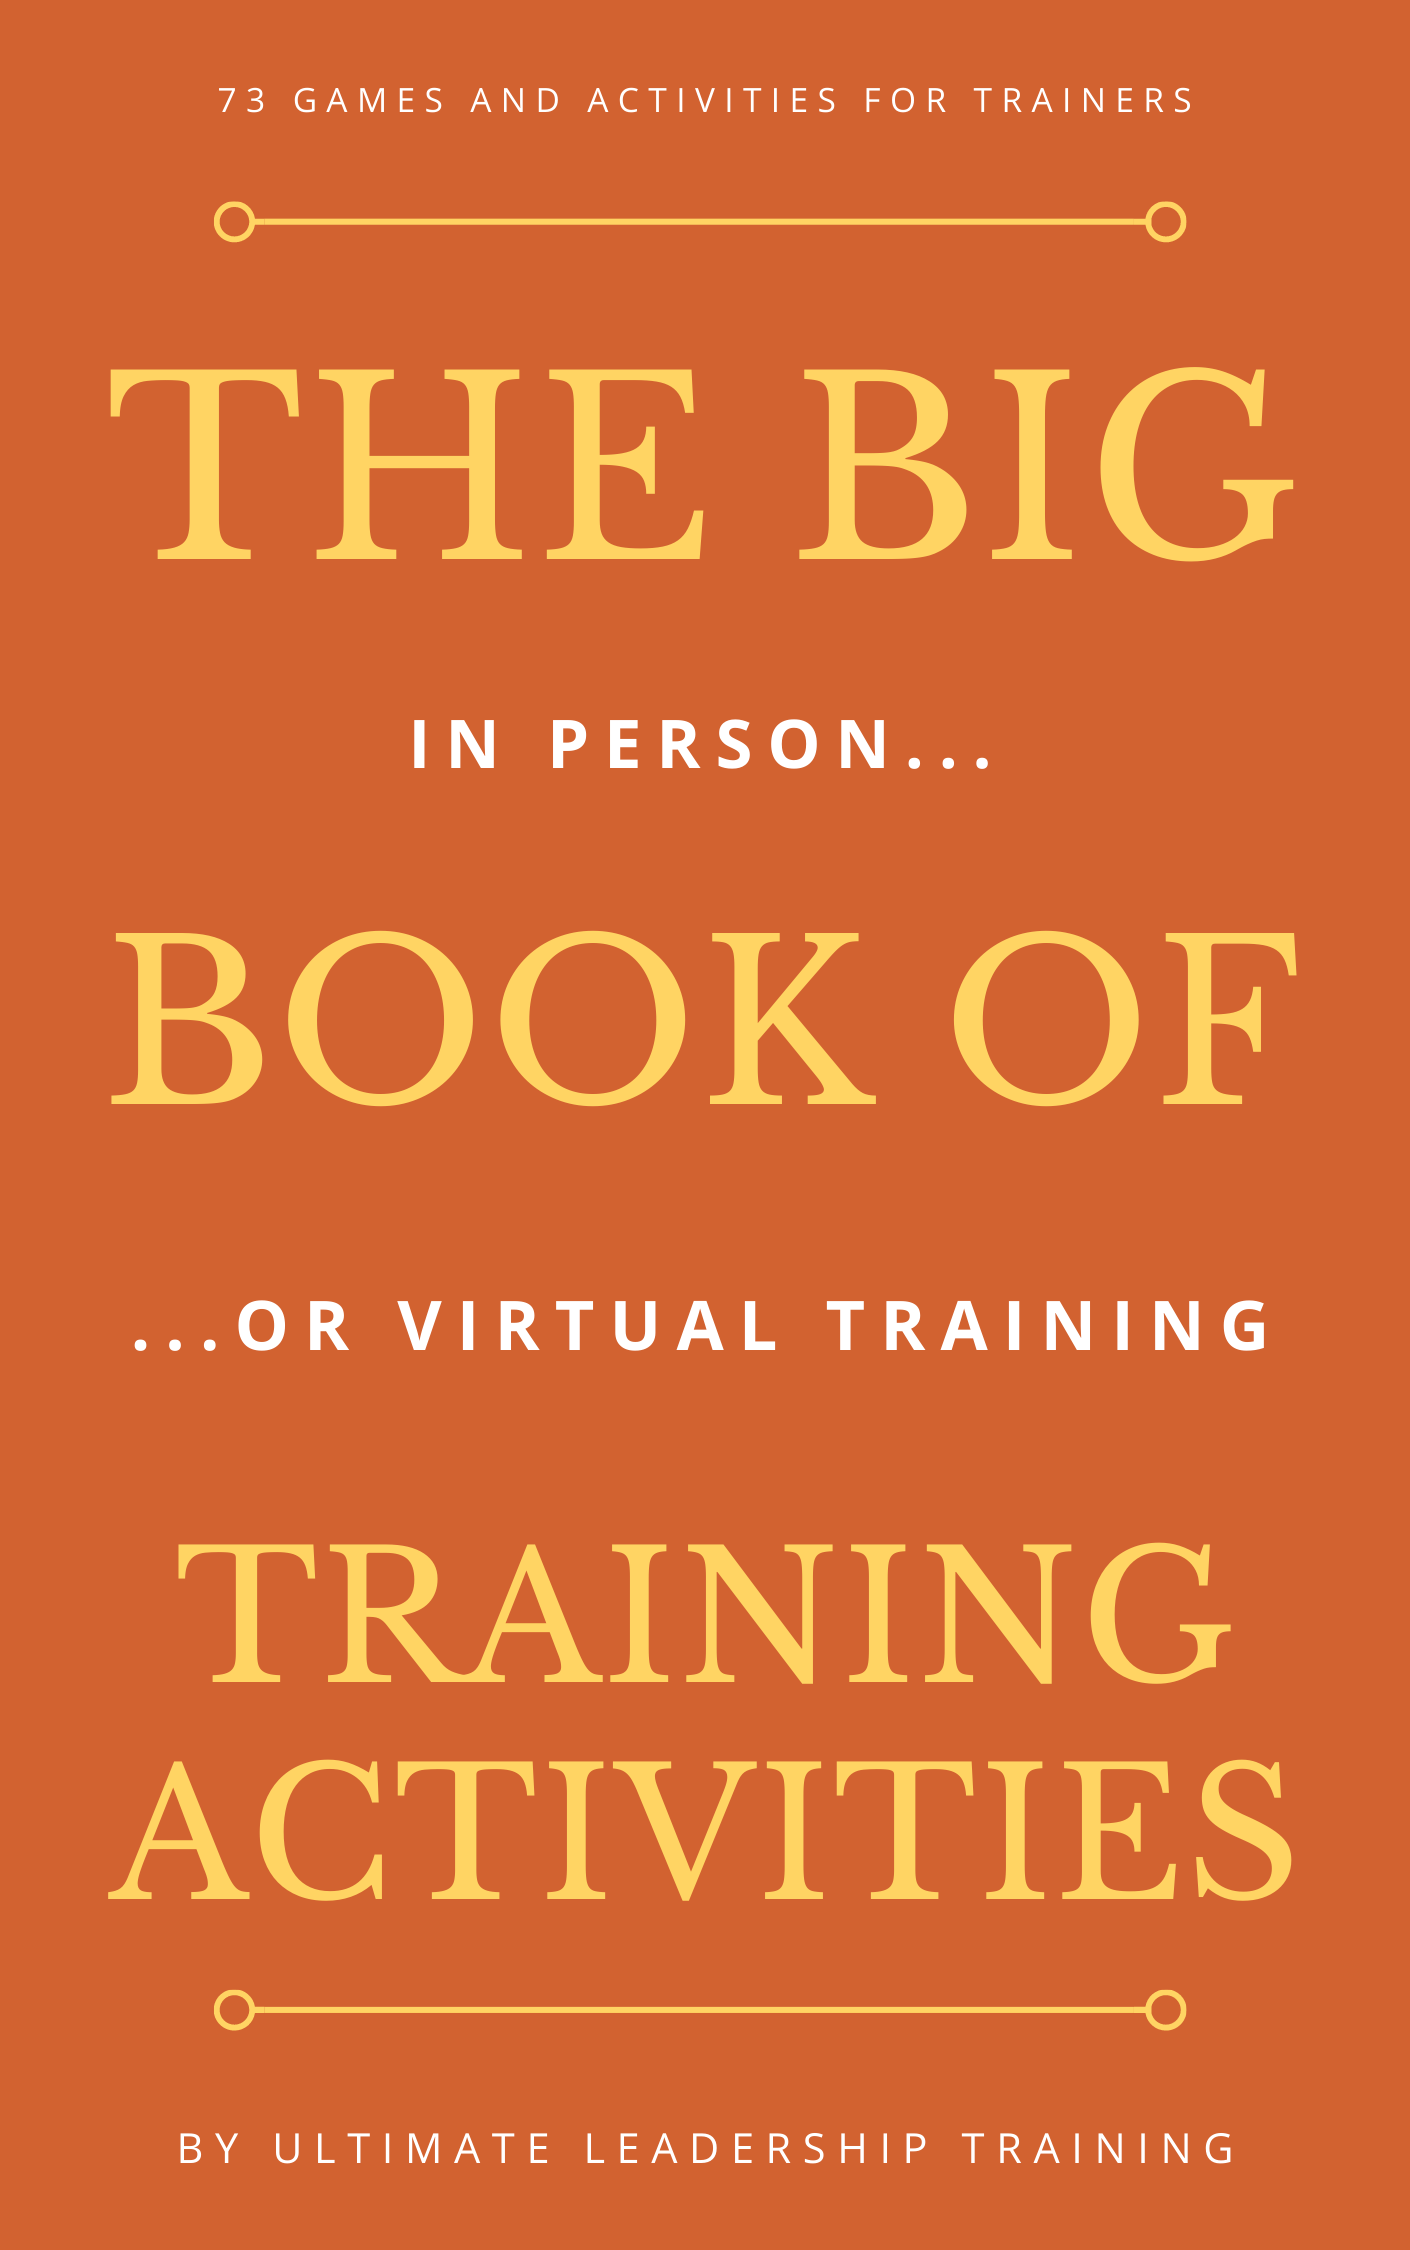 The Big Book of Training Games and Team building Activities